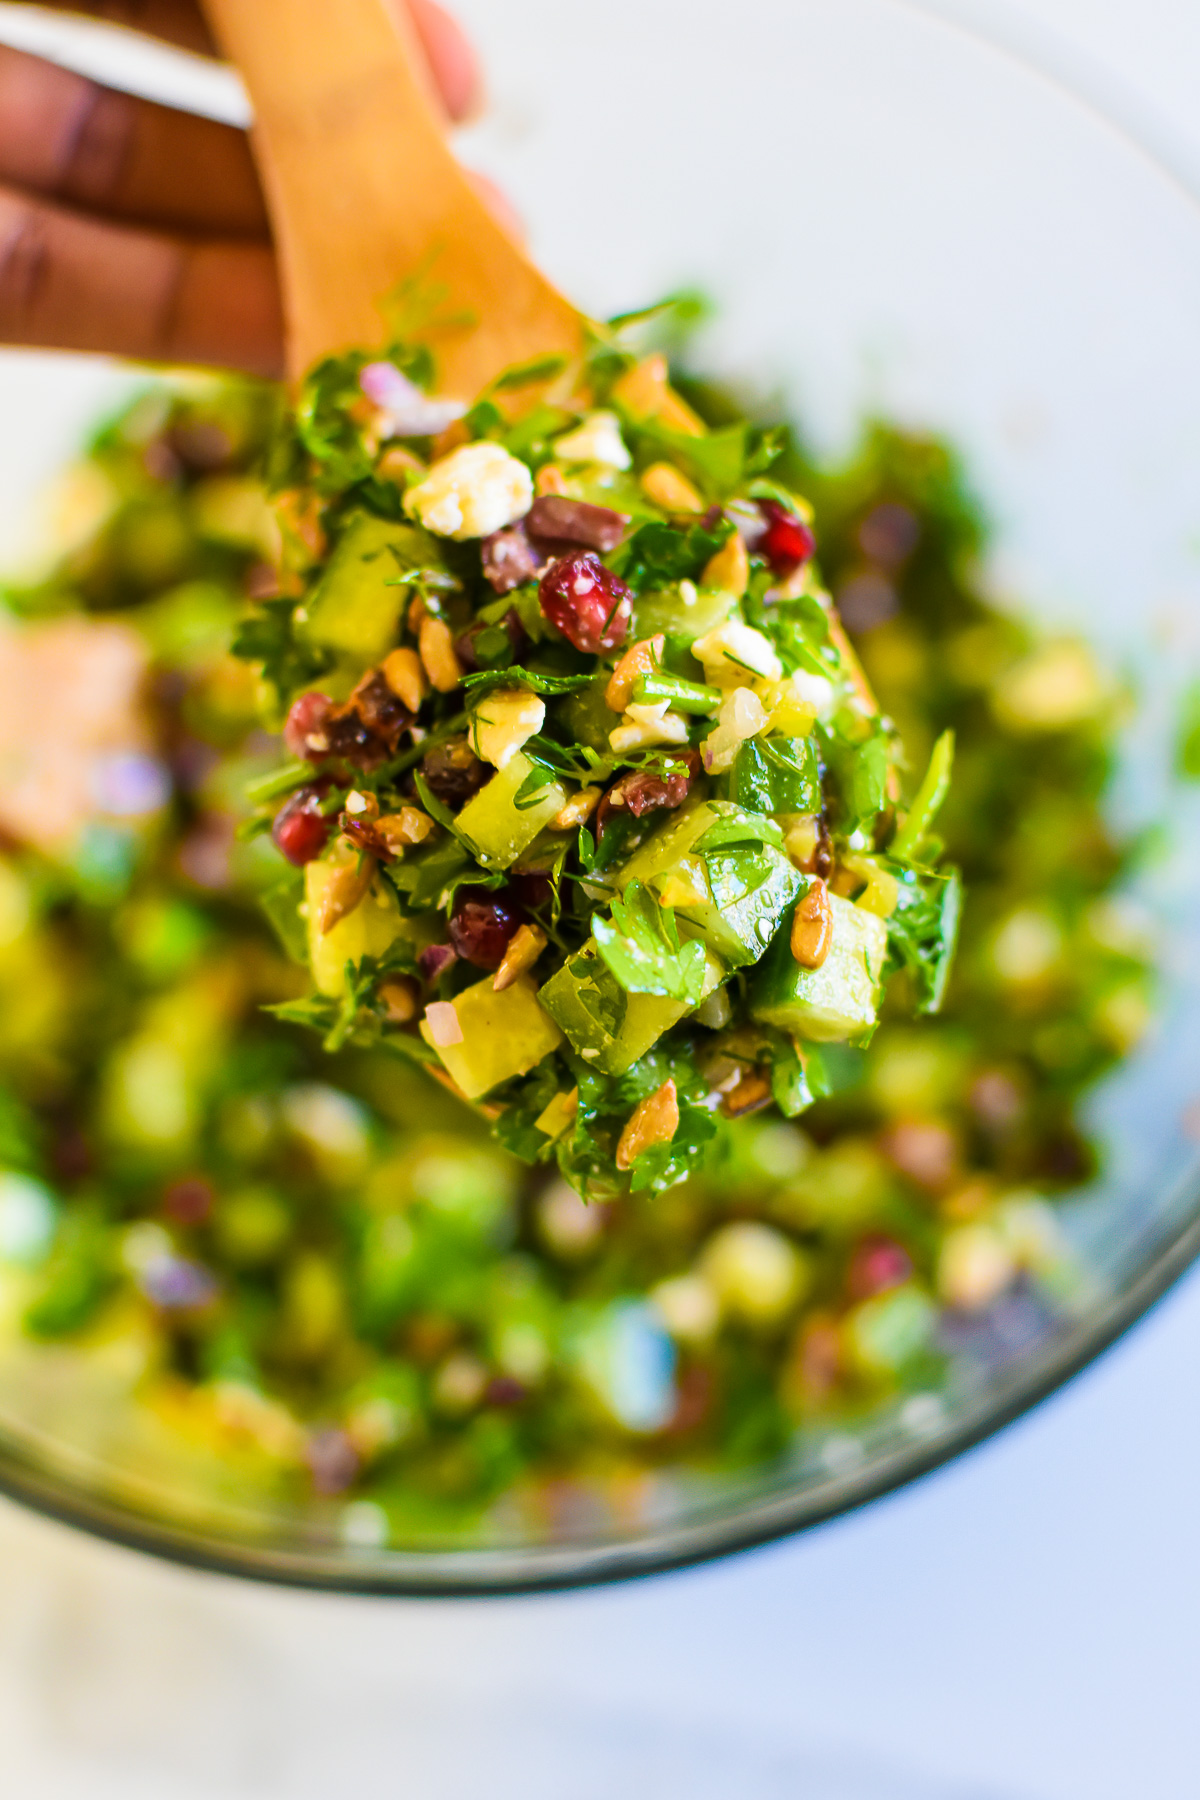 spoonful of chopped cucumbers, herbs, pomegranate, feta cheese, seeds, dates, olives, and peppers dressed in simple vinaigrette.